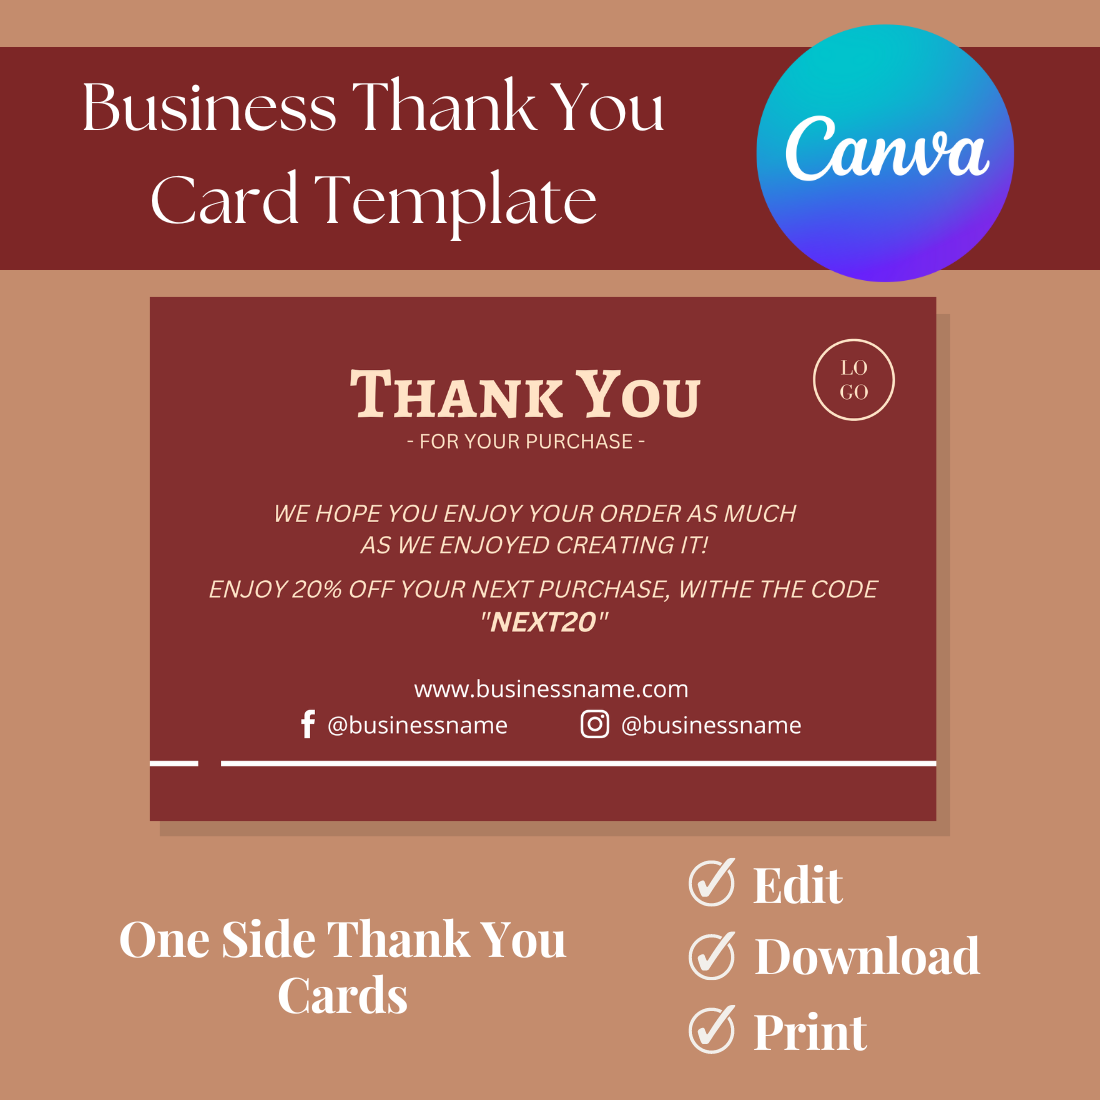 Thank You Card Printable Business Template cover image.